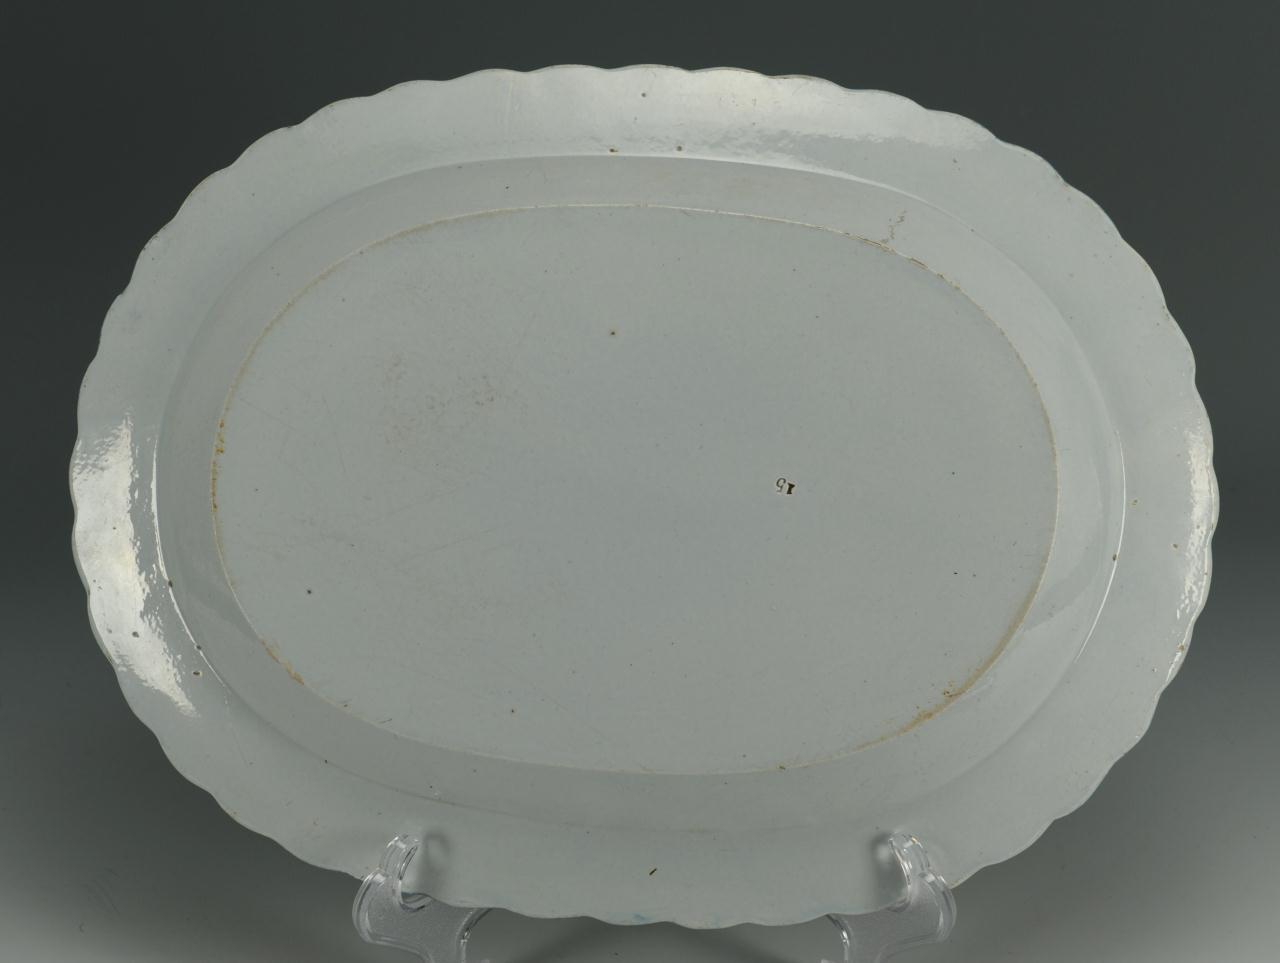 Lot 558: Large group of Decorative Trays and Ceramics